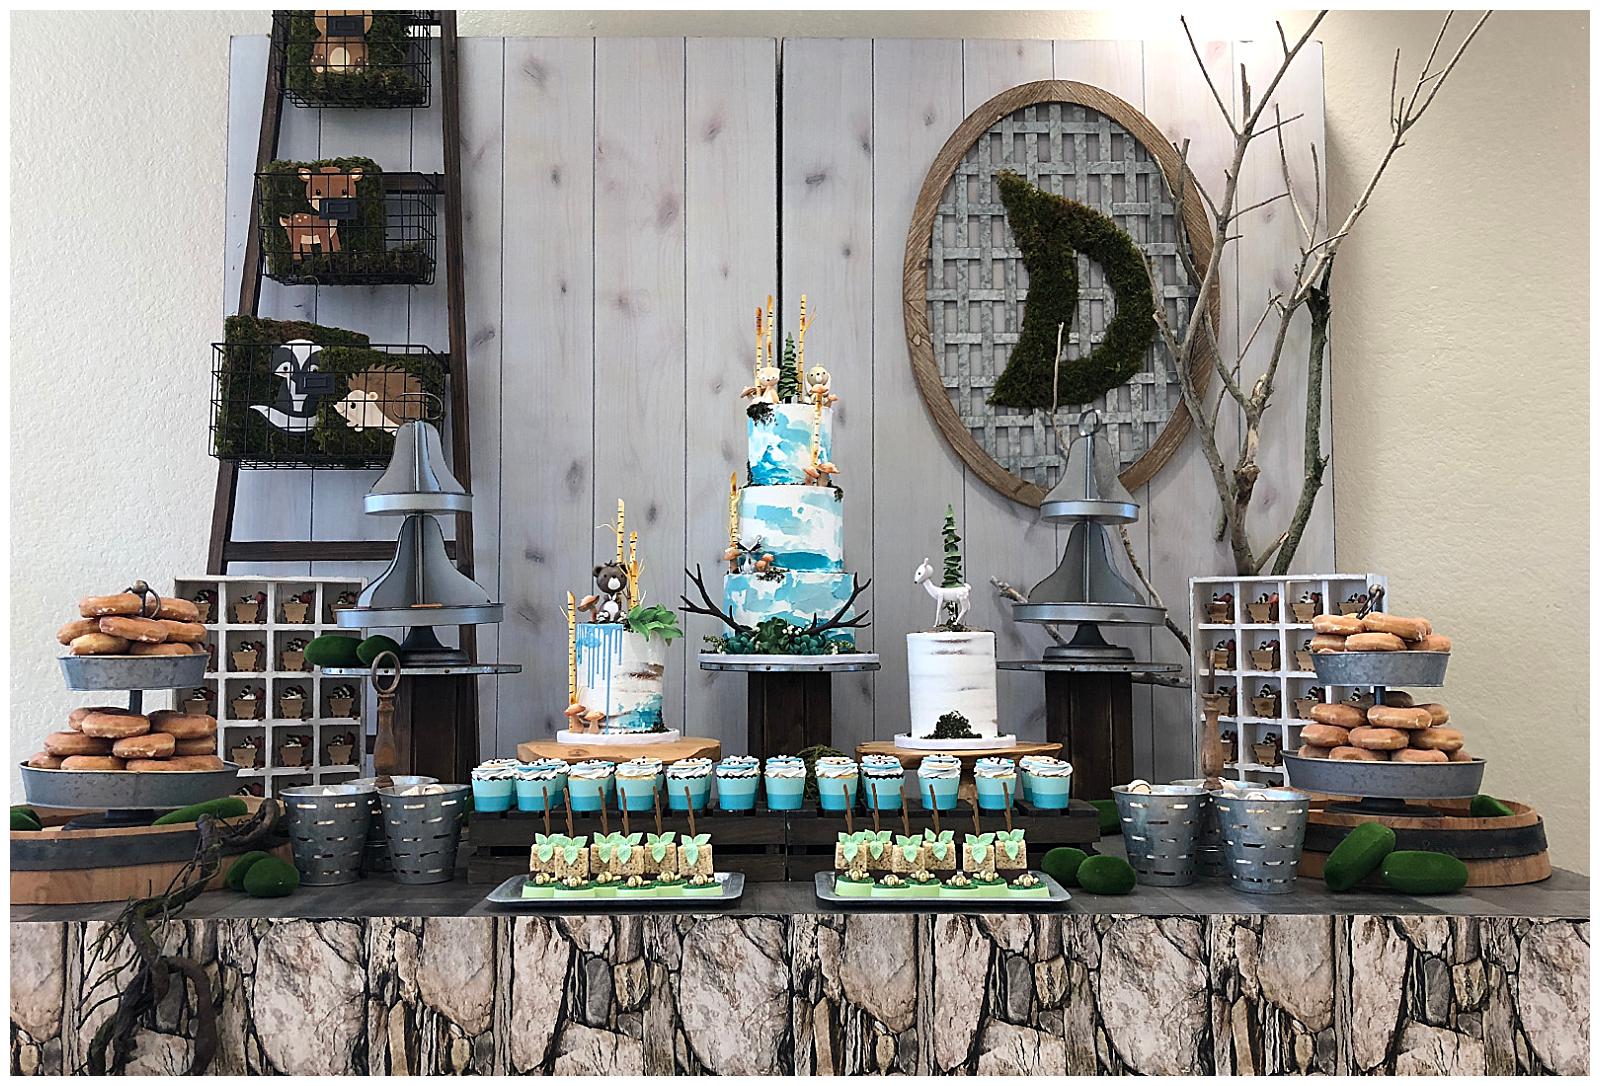 Welcoming Baby Donovan  “Forrest Animals” Themed Baby Shower Cake